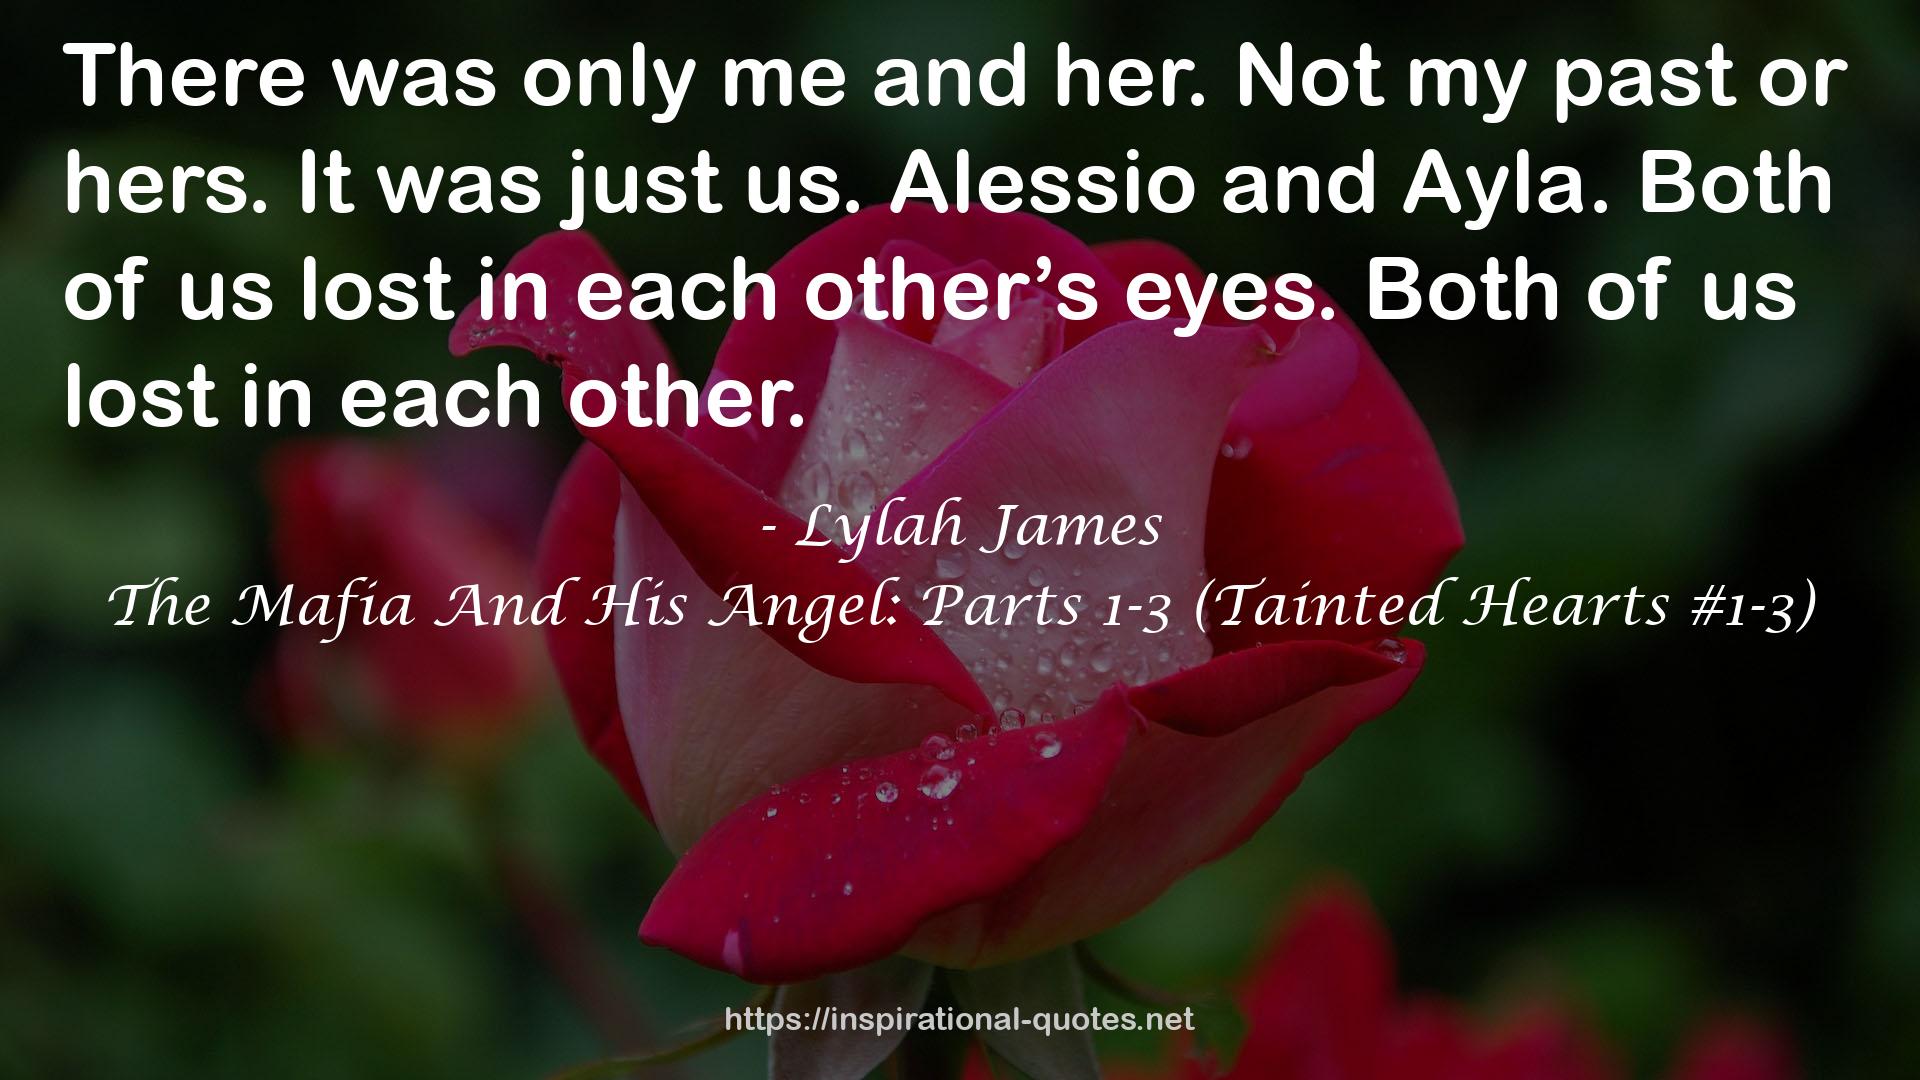 The Mafia And His Angel: Parts 1-3 (Tainted Hearts #1-3) QUOTES